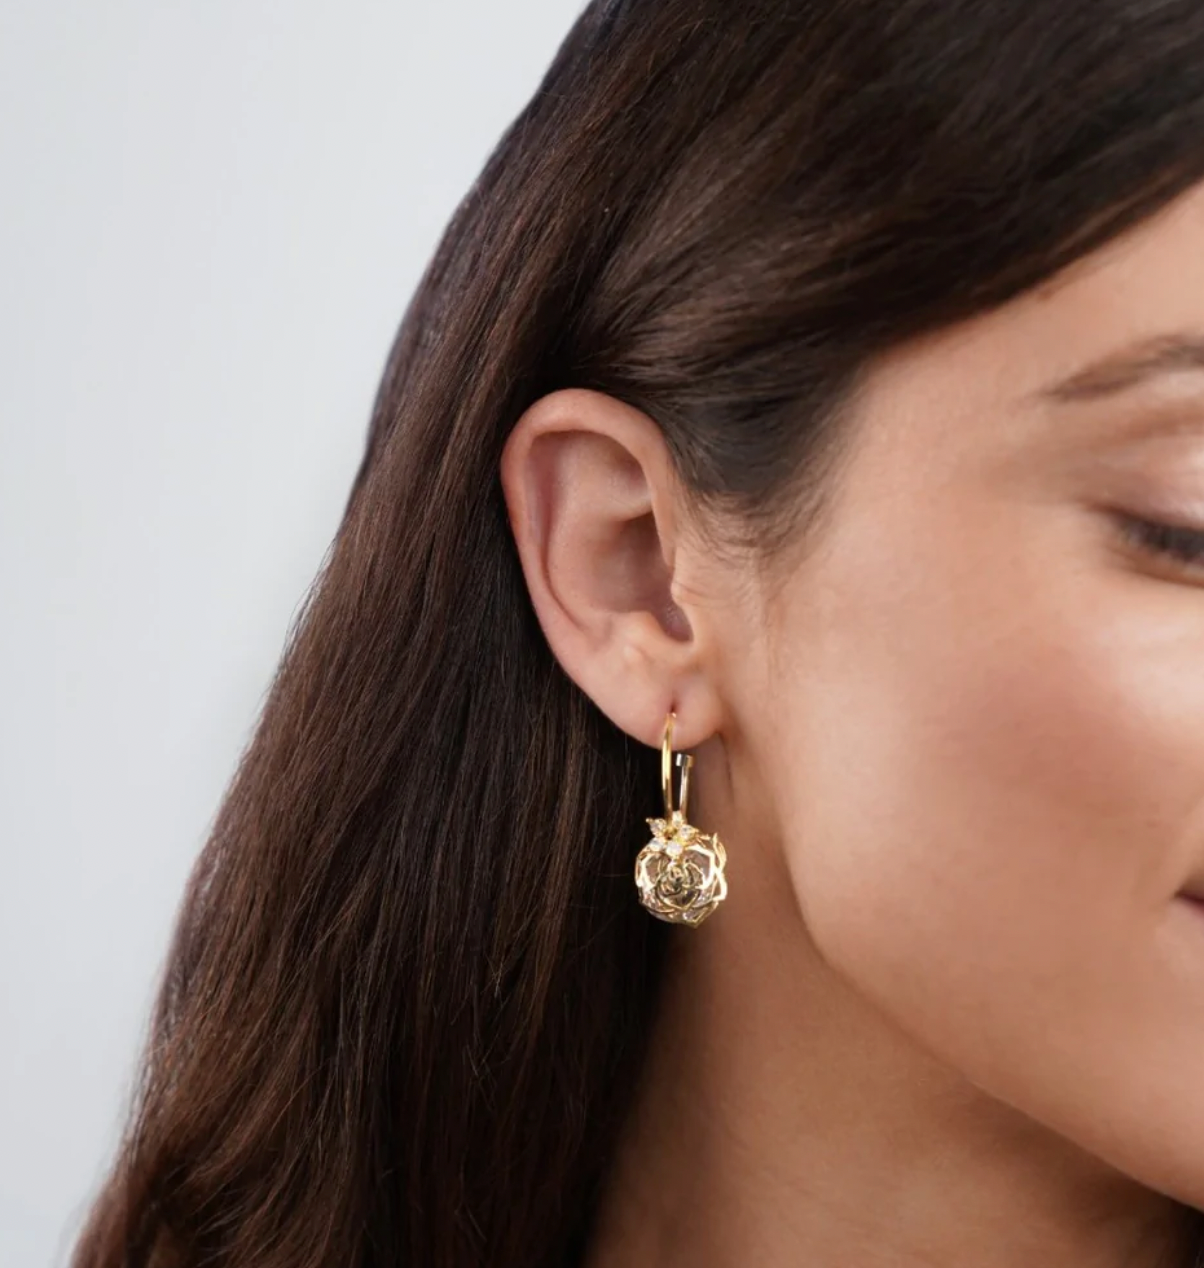 Shiny Floral Ball Earrings in Gold